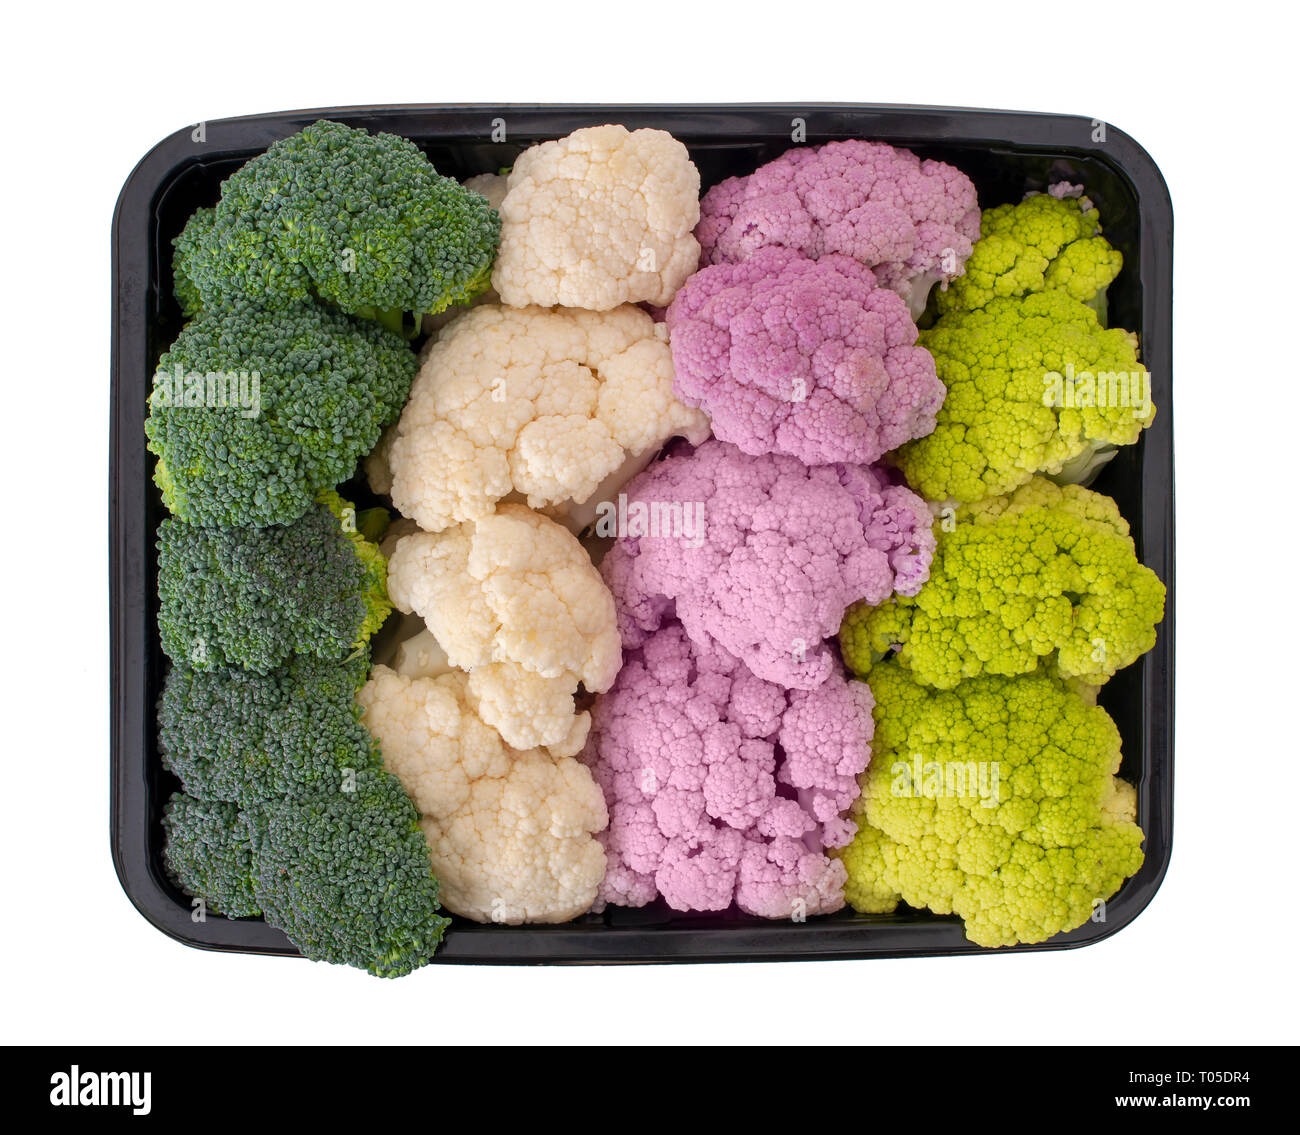 Colourful vegetables, isolated on white. Raw cauliflower and broccoli florets. Healthy assortment. Supermarket packed. Stock Photo